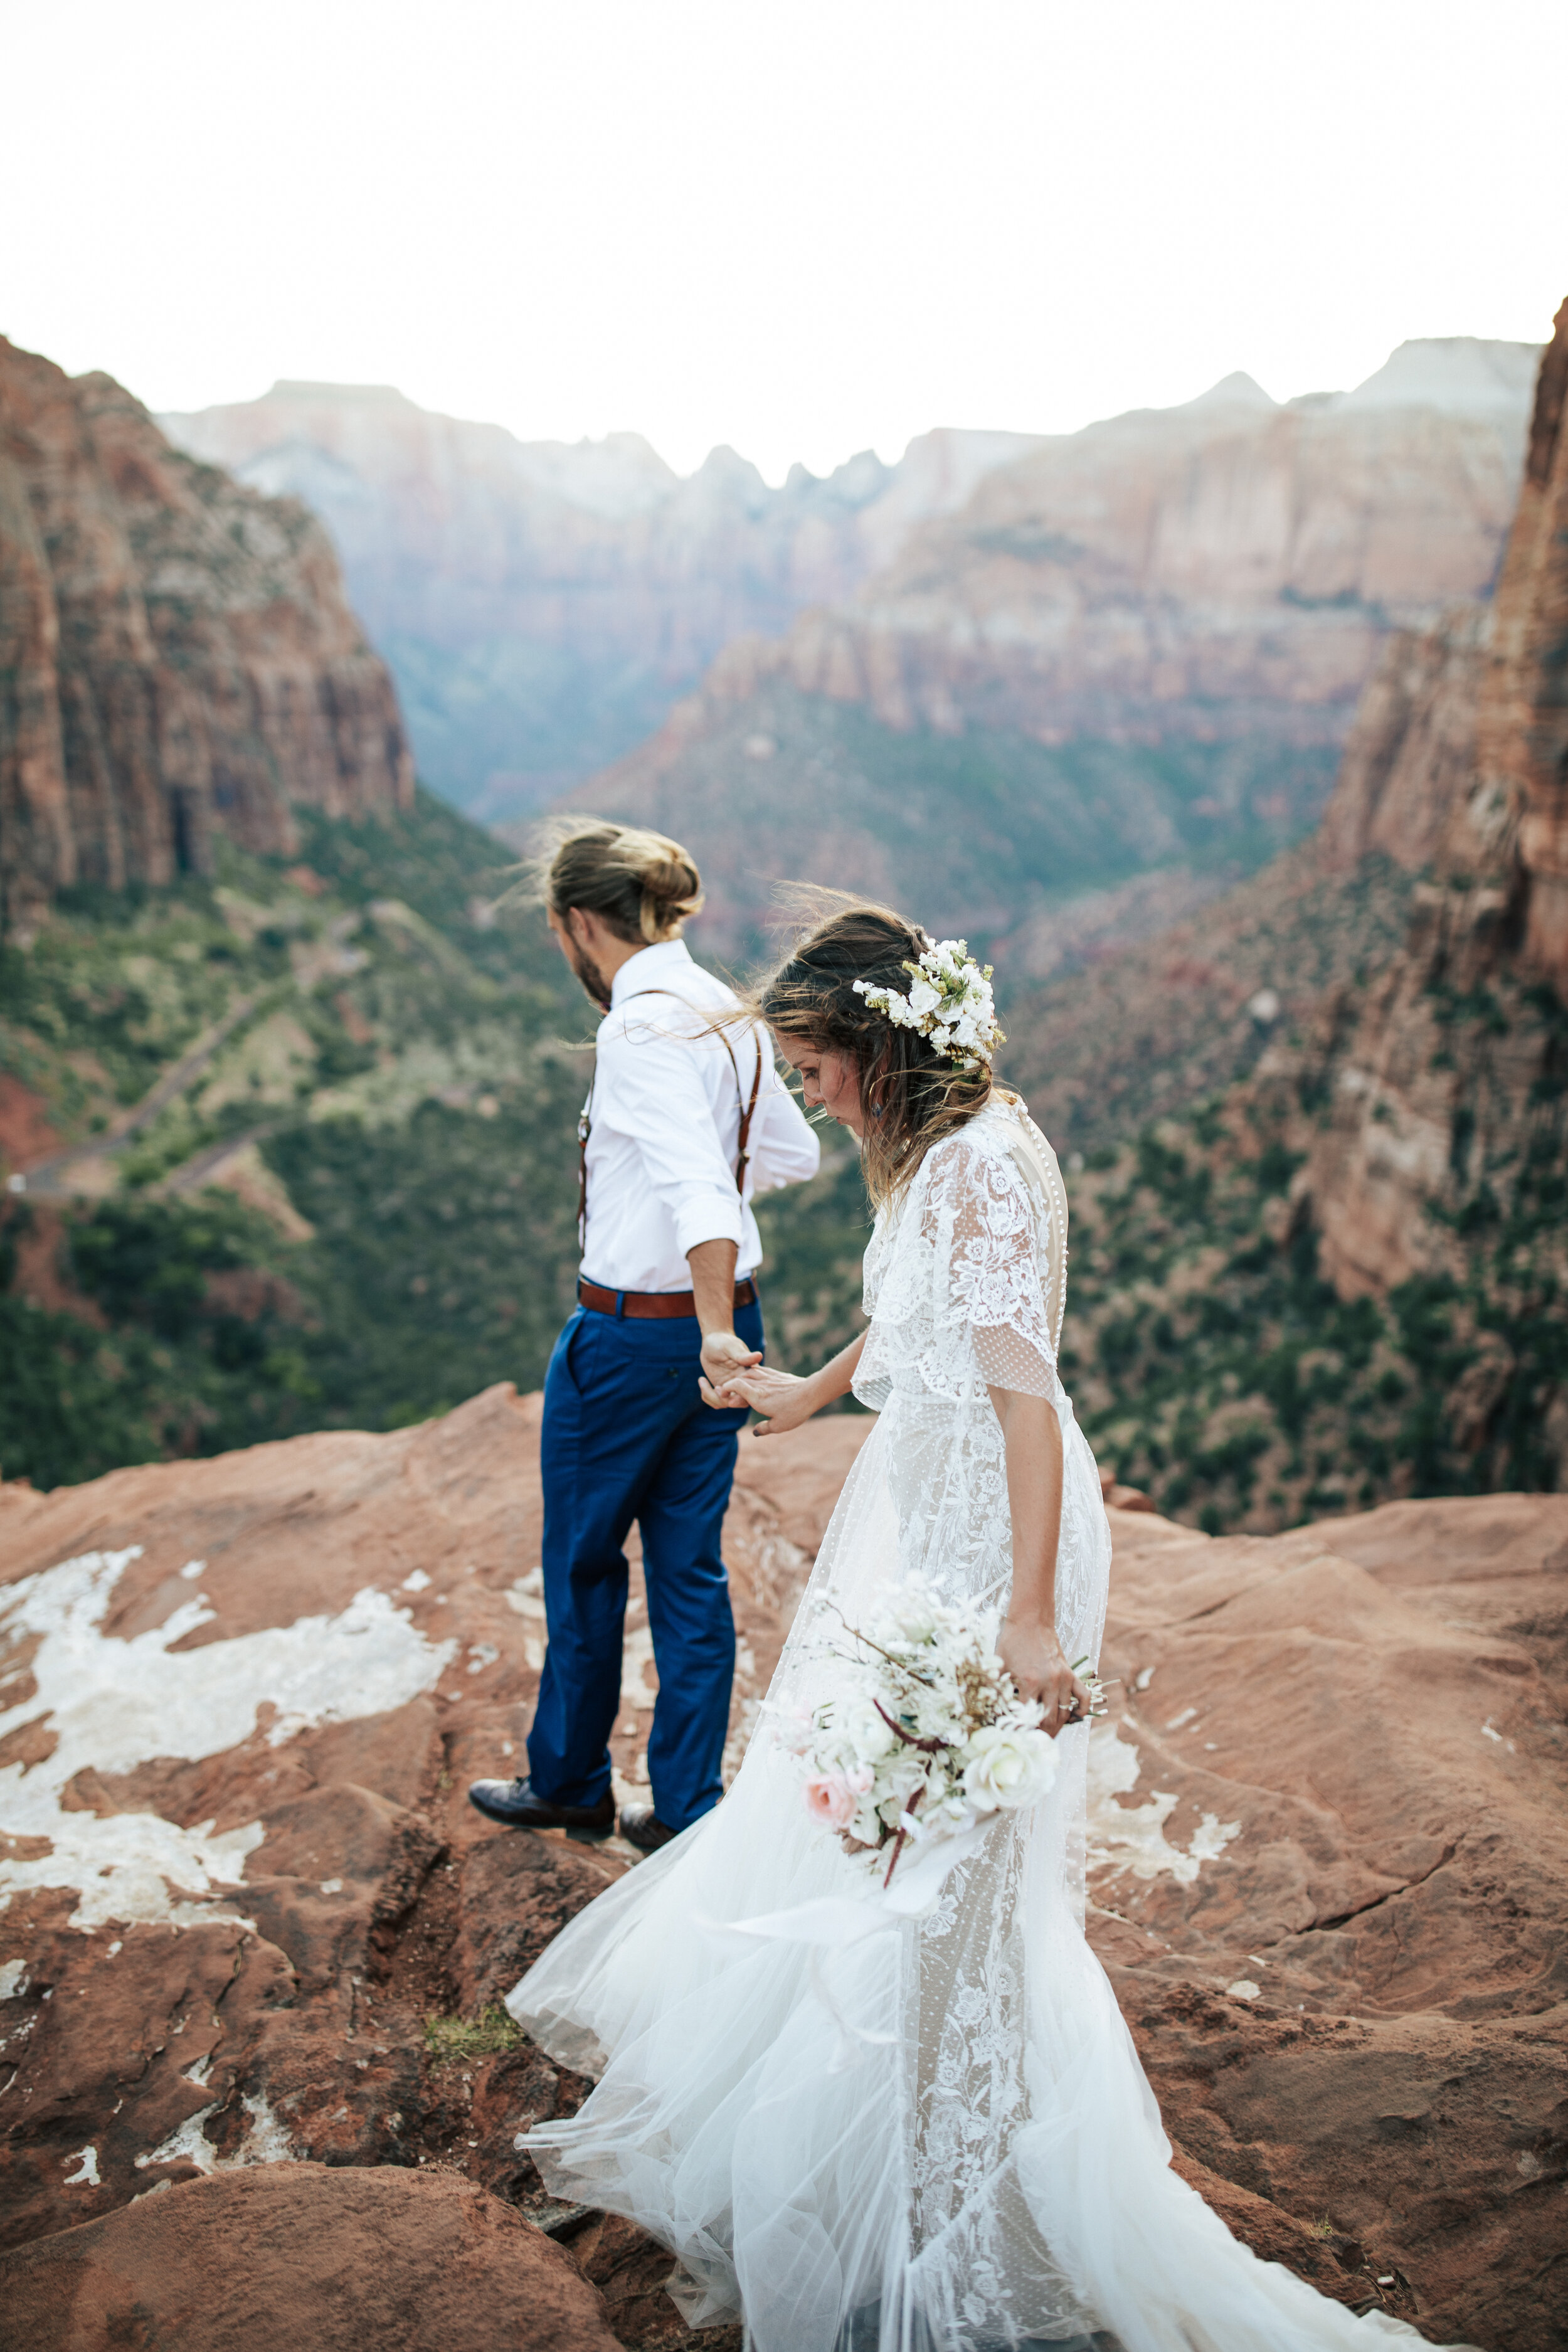  A groom leads his stunning bride to the edge of the rock face in a beautiful outdoor elopement photo shoot in Zion National Park, Utah by Emily Jenkins Photography. Wedding aesthetic inspiration ideas and goals for outdoor weddings elopement goals c